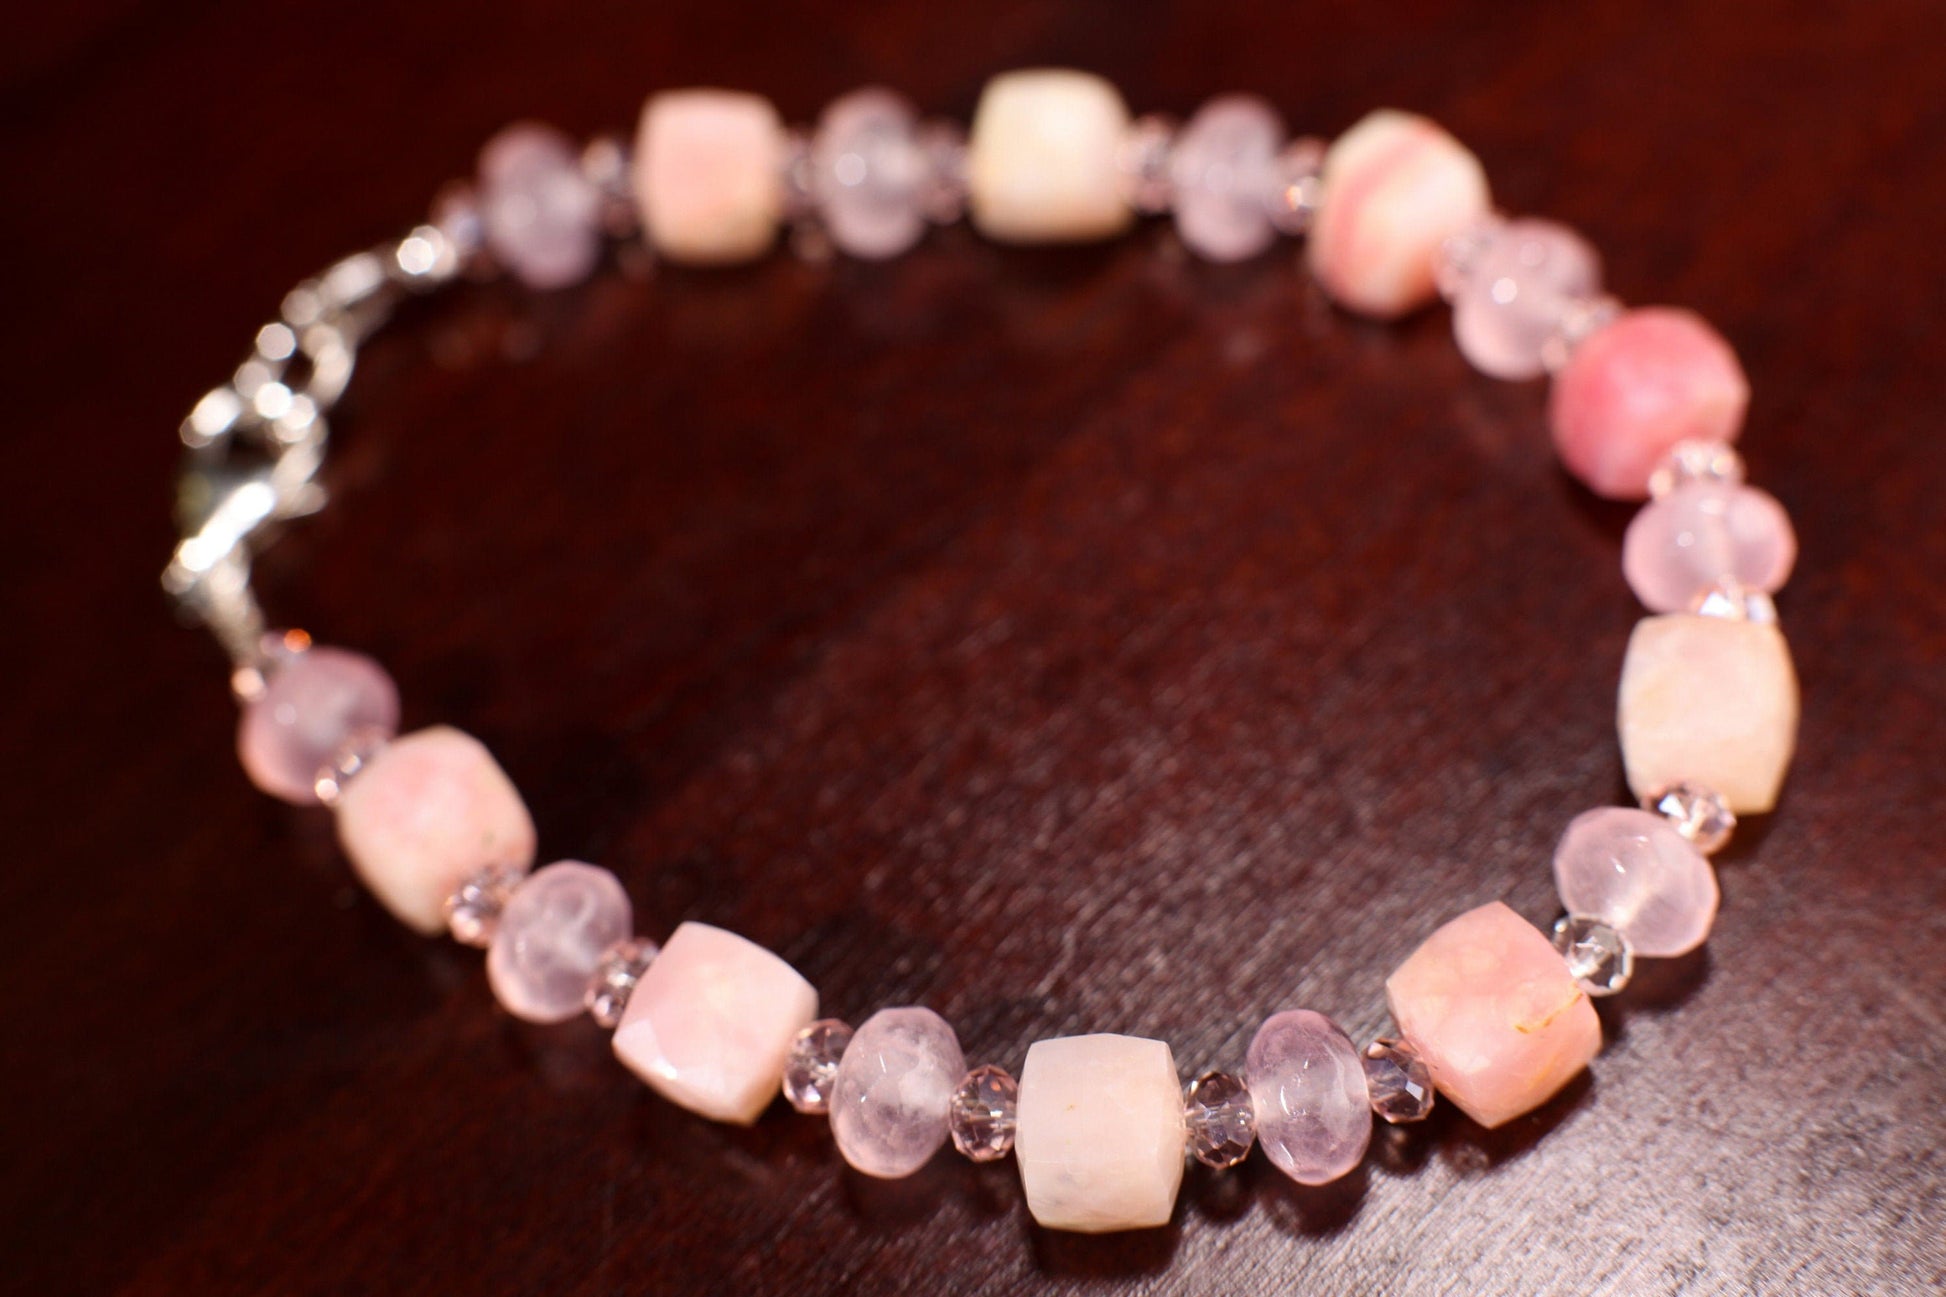 Natural Pink Peruvian Opal 8mm Cube Bracelet Accent with 8mm Rose Quartz roundel Spacer in 925 Sterling Silver Clasp,love, Valentine gift